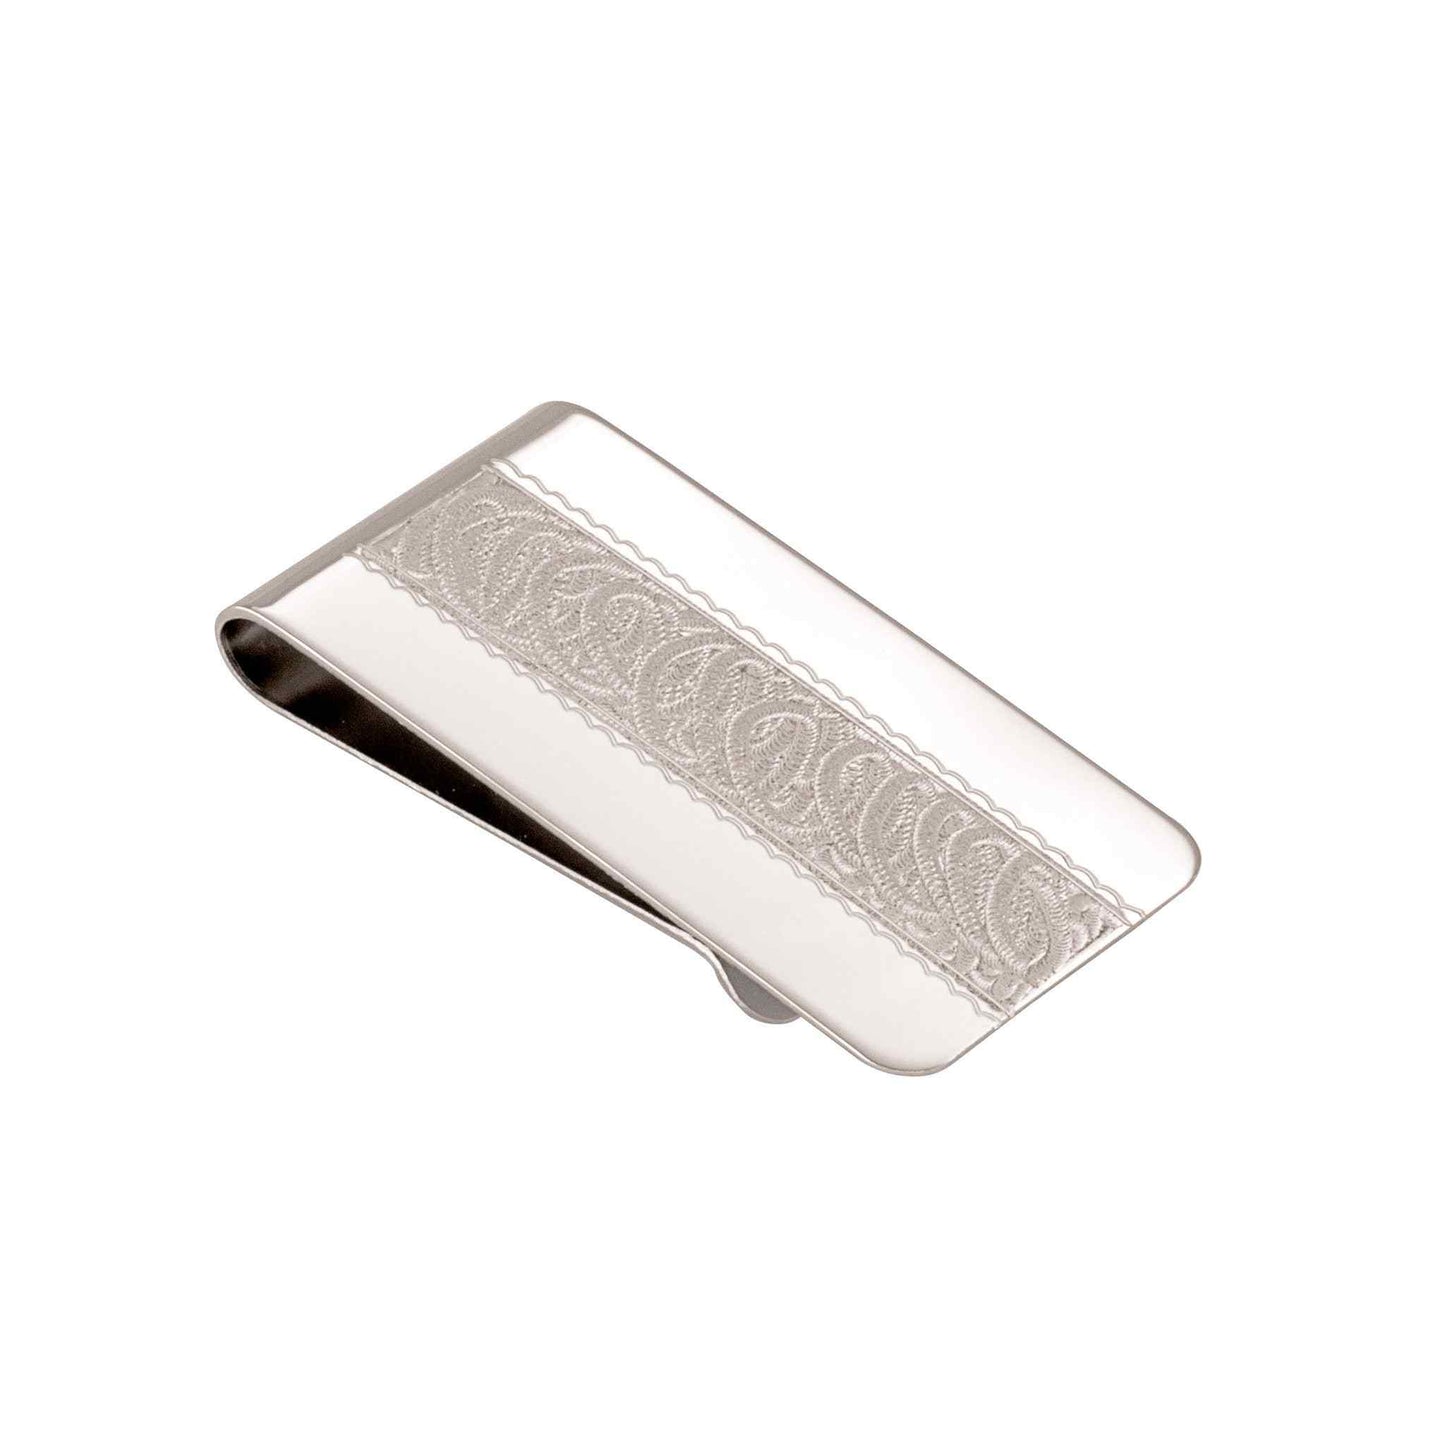 A engraved money clip displayed on a neutral white background.